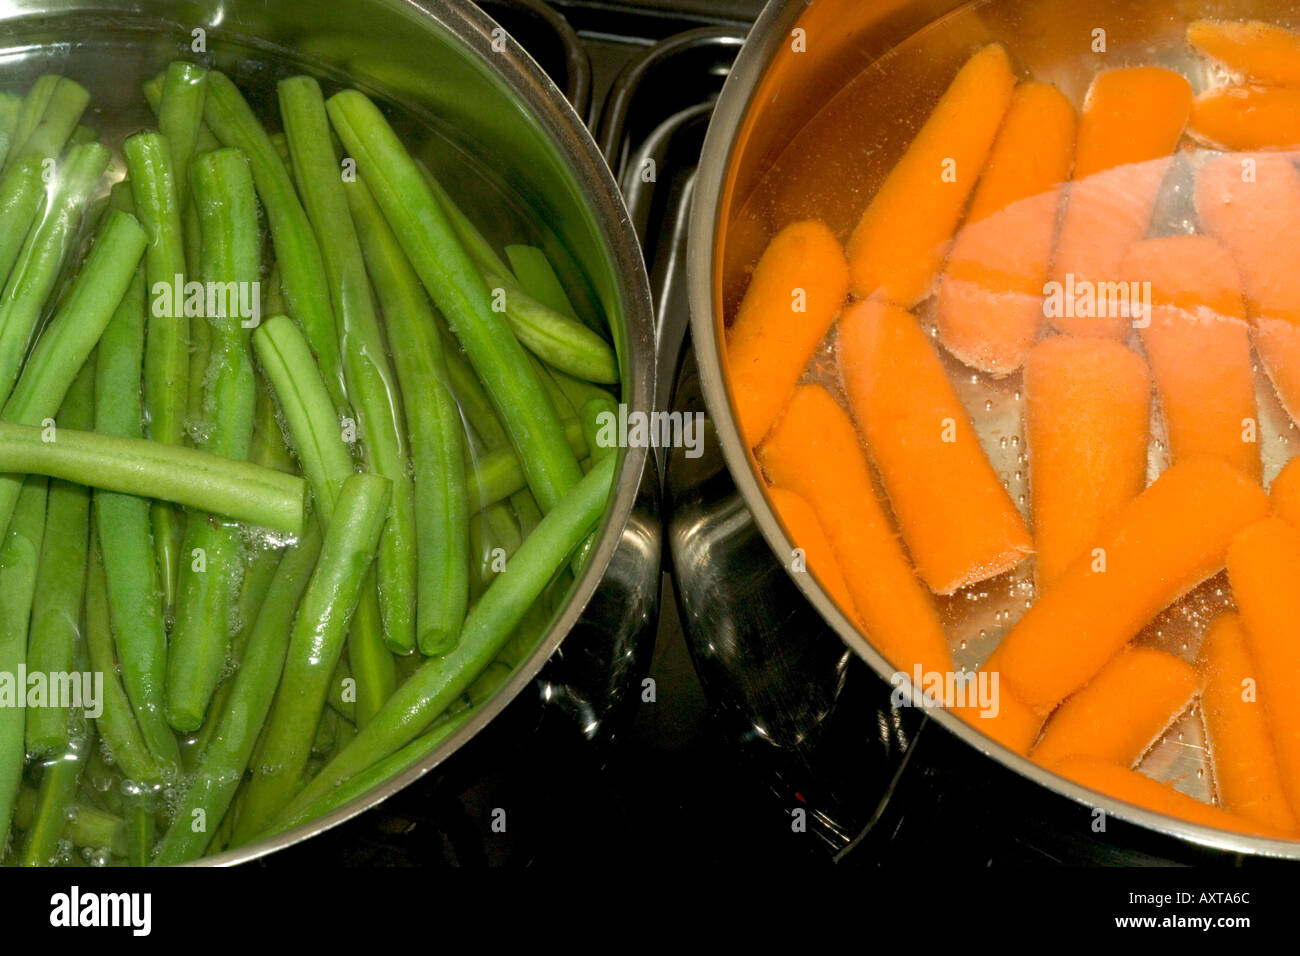 Organic Carrots and Beans Cooking Stock Photo